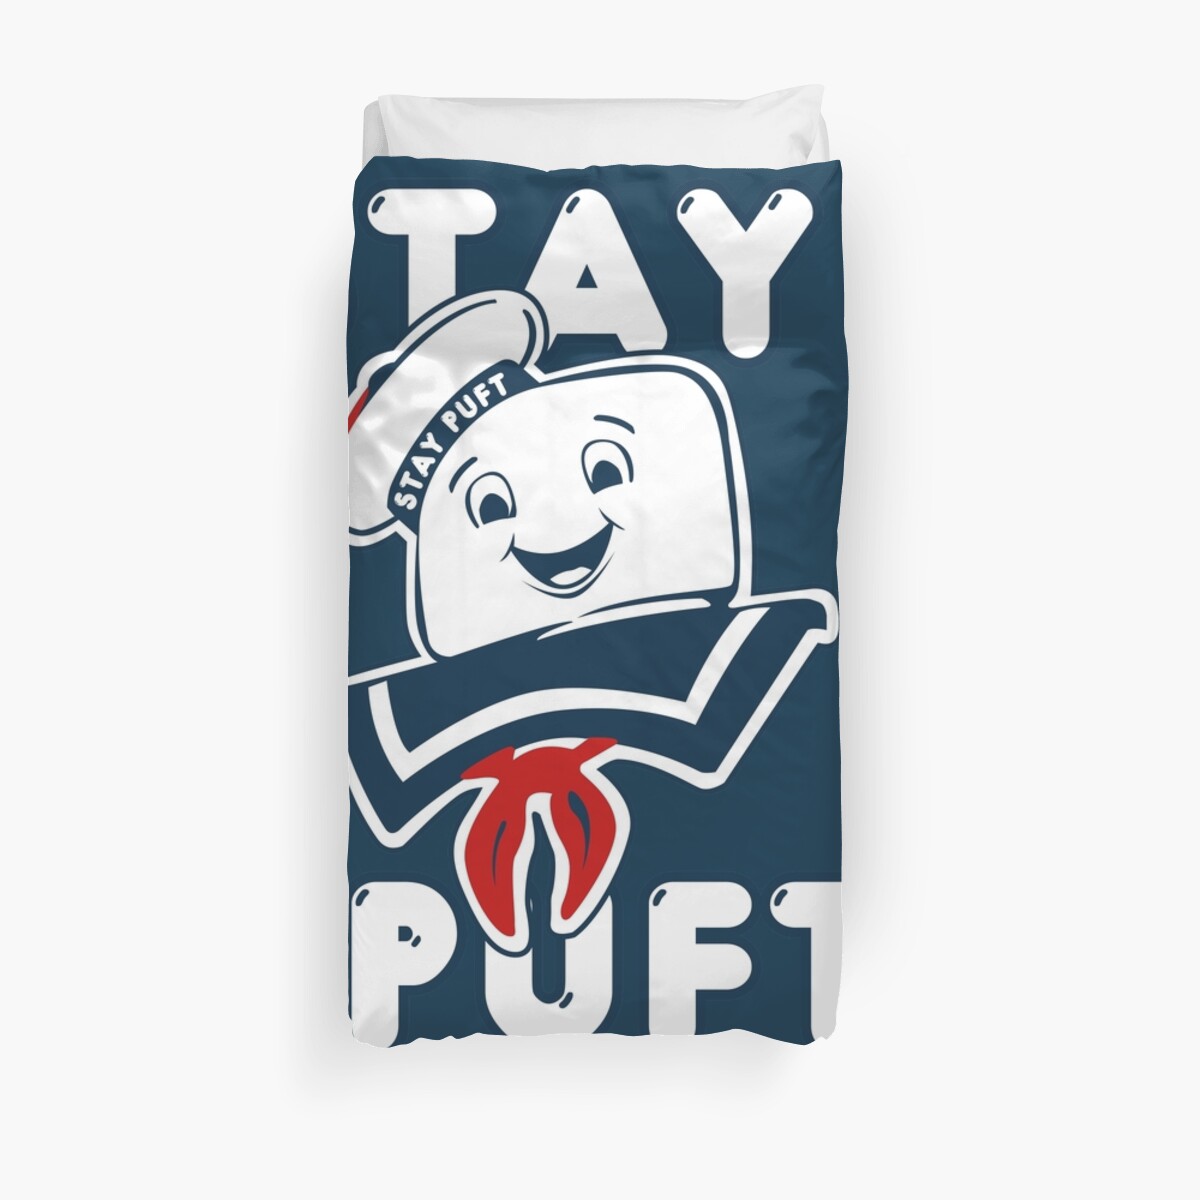 Stay Puft Even When Toasted Duvet Cover By Myronmhouse Redbubble